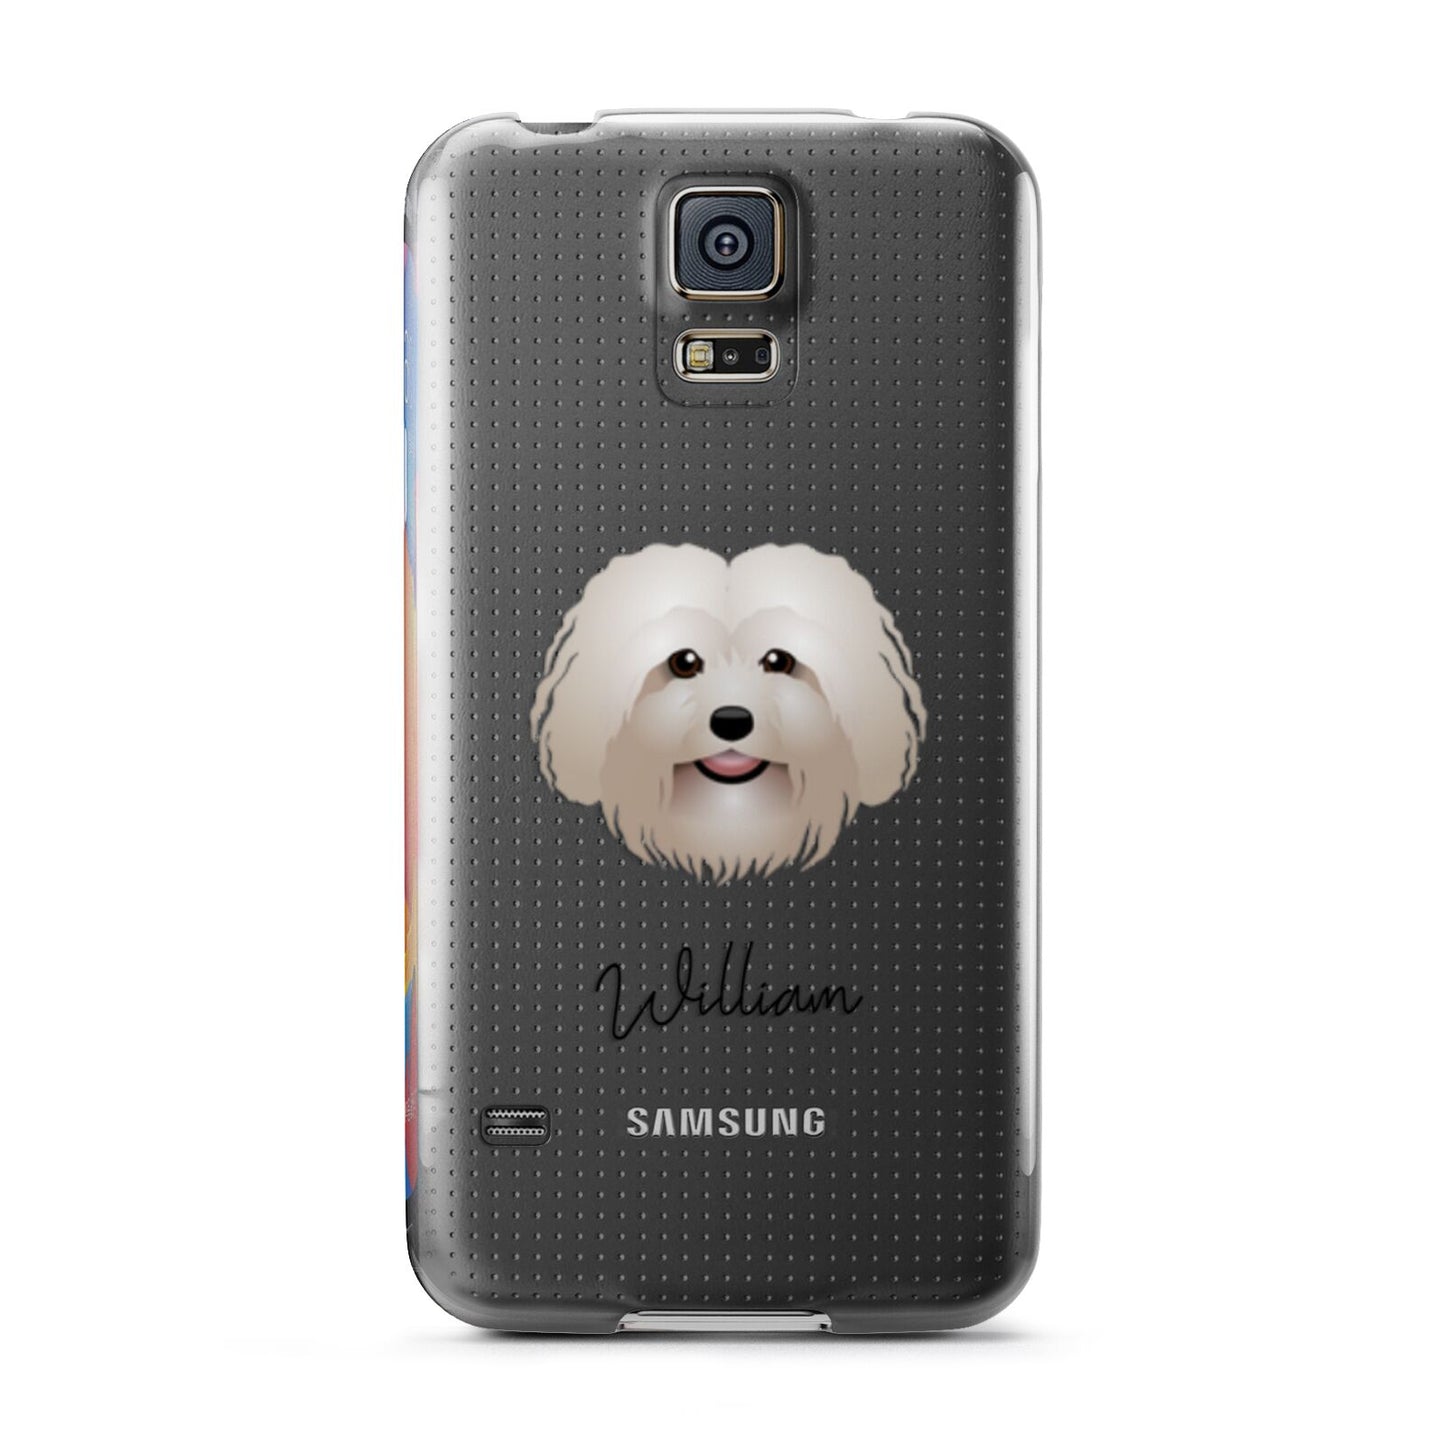 Bolognese Personalised Samsung Galaxy S5 Case